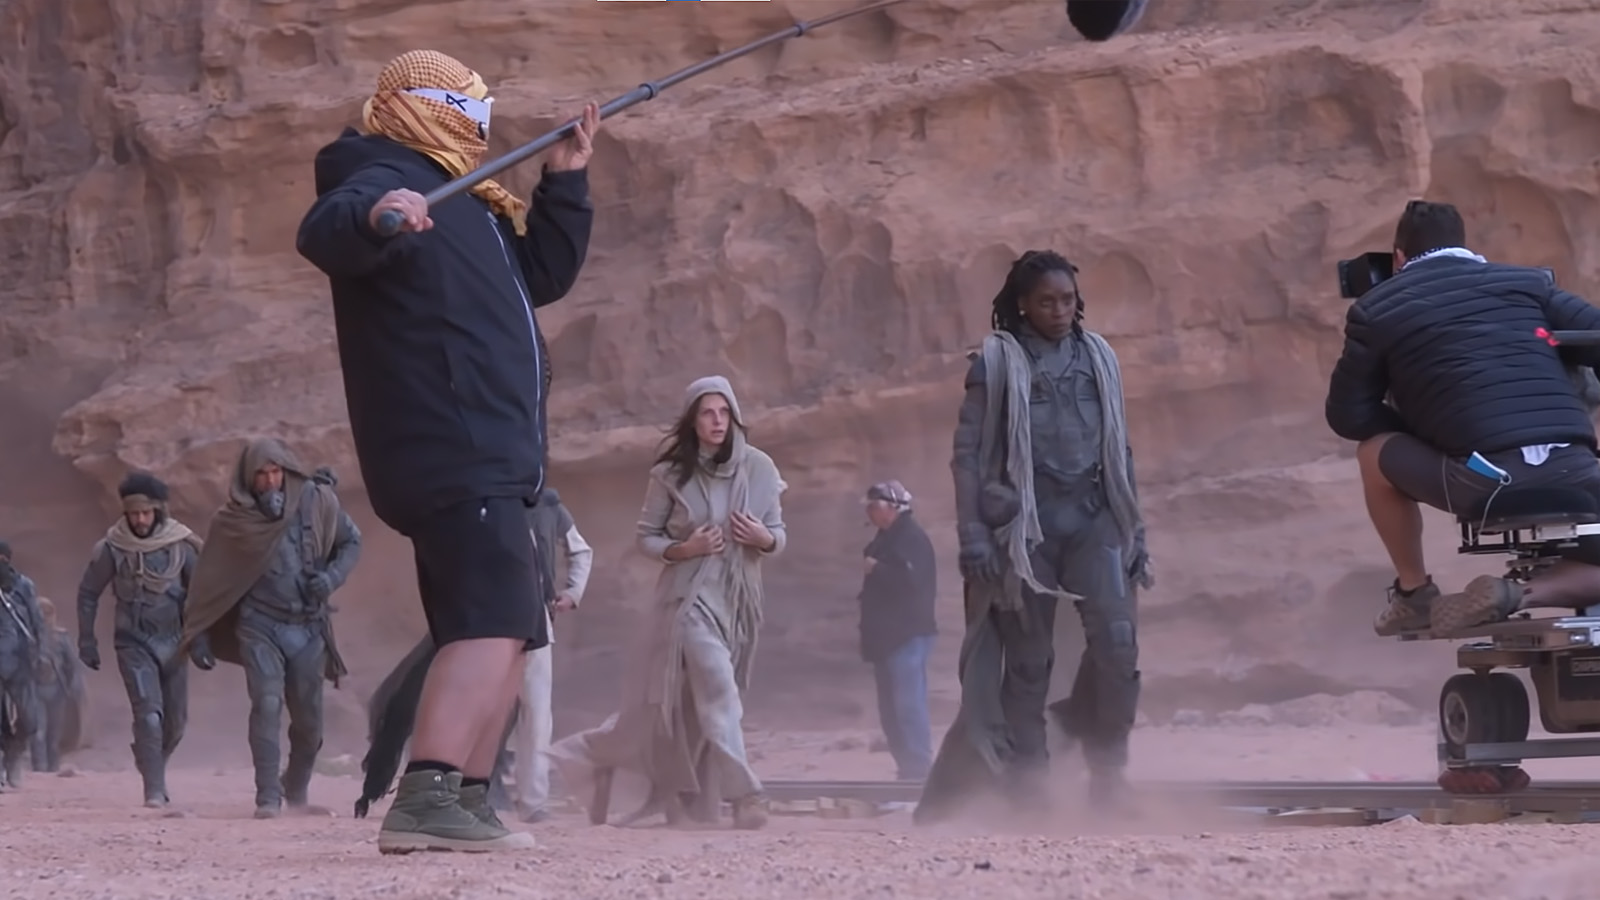 Tracking shot of the Fremen and Lady Jessica following Liet Kynes across the sand. Image © Warner Bros.